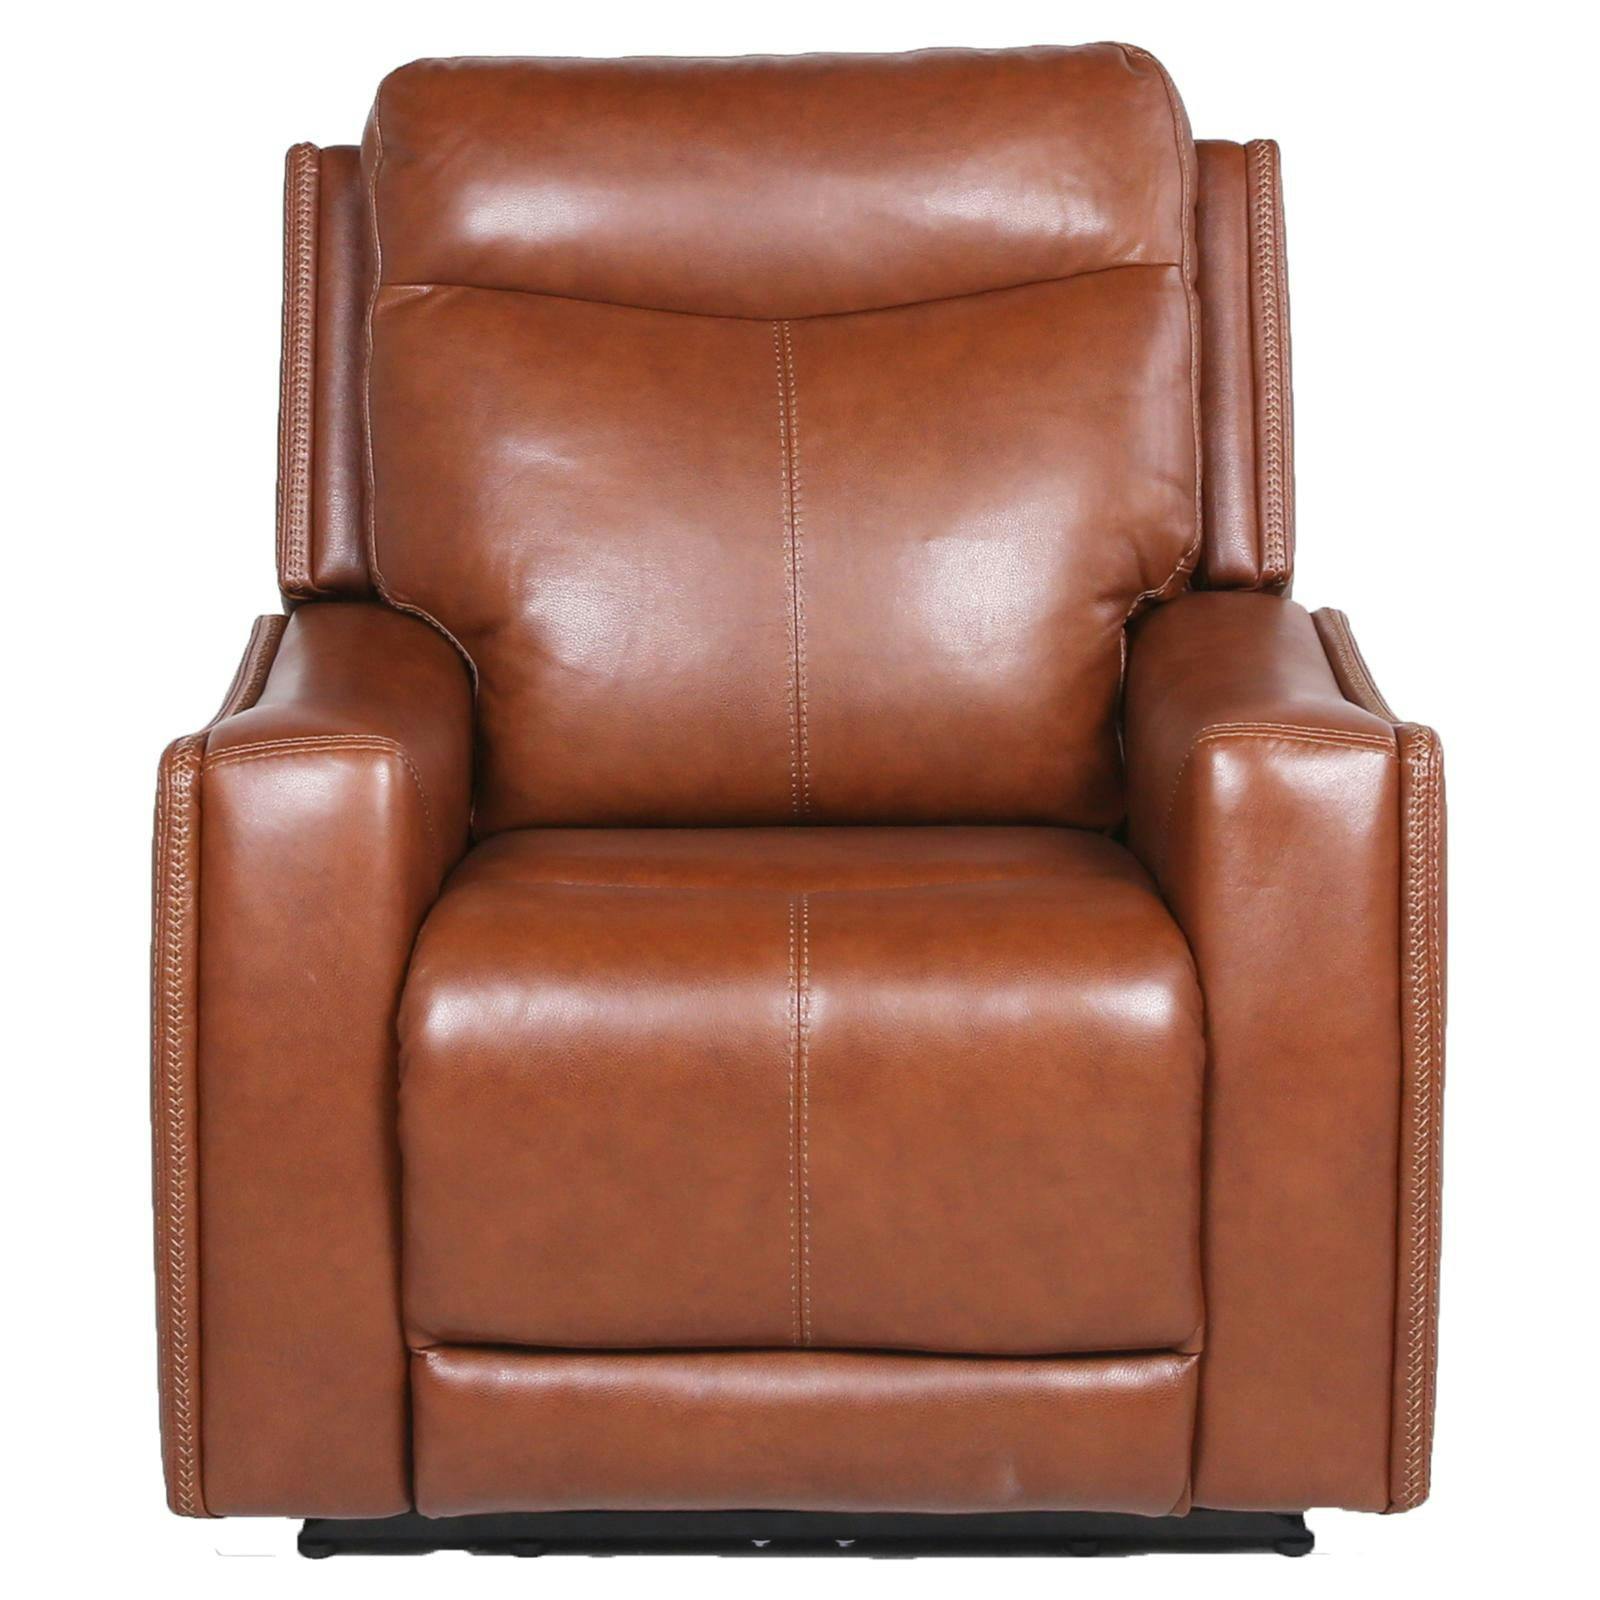 Natalia Contemporary Caramel Leather Power Recliner with USB Port